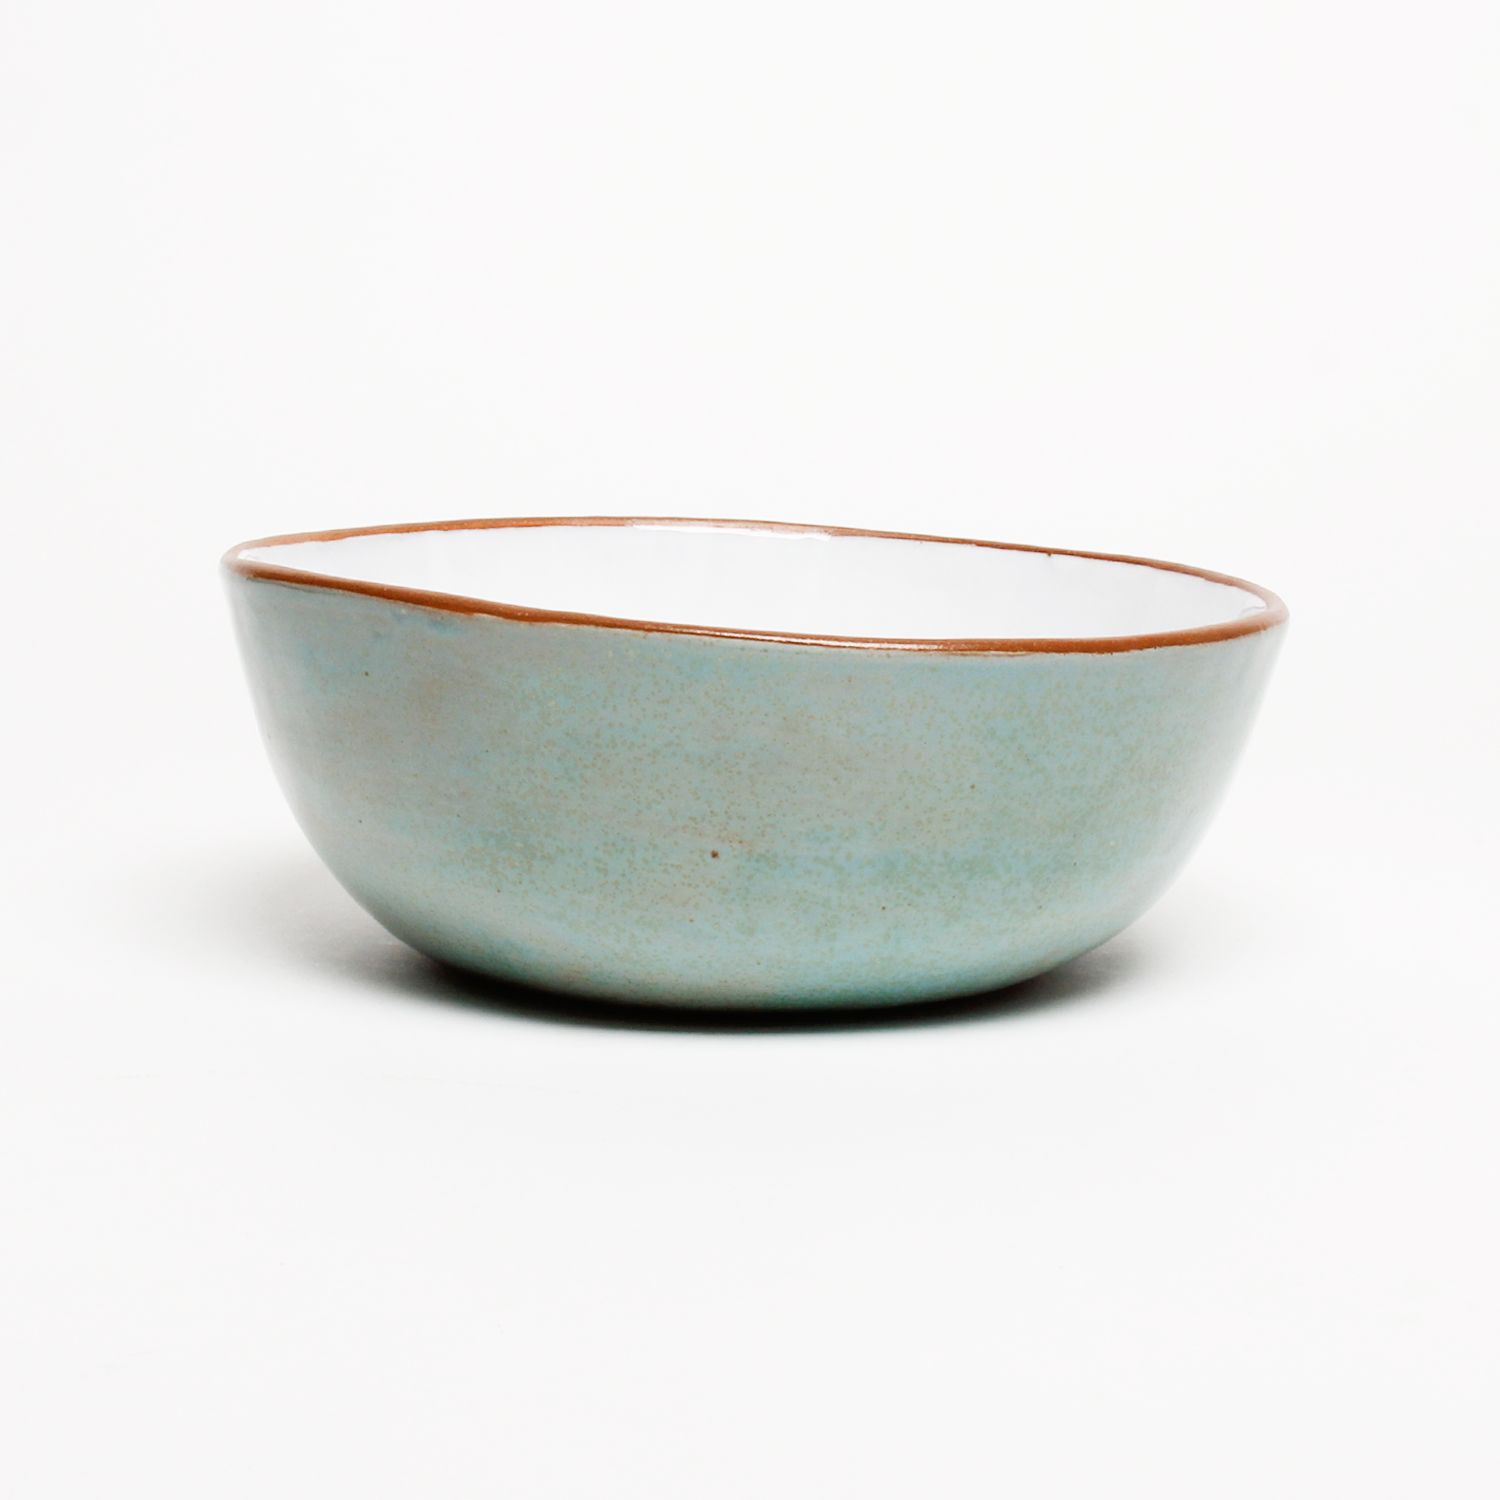 Jacquie Blondin: Large Pinch Pot Product Image 1 of 2